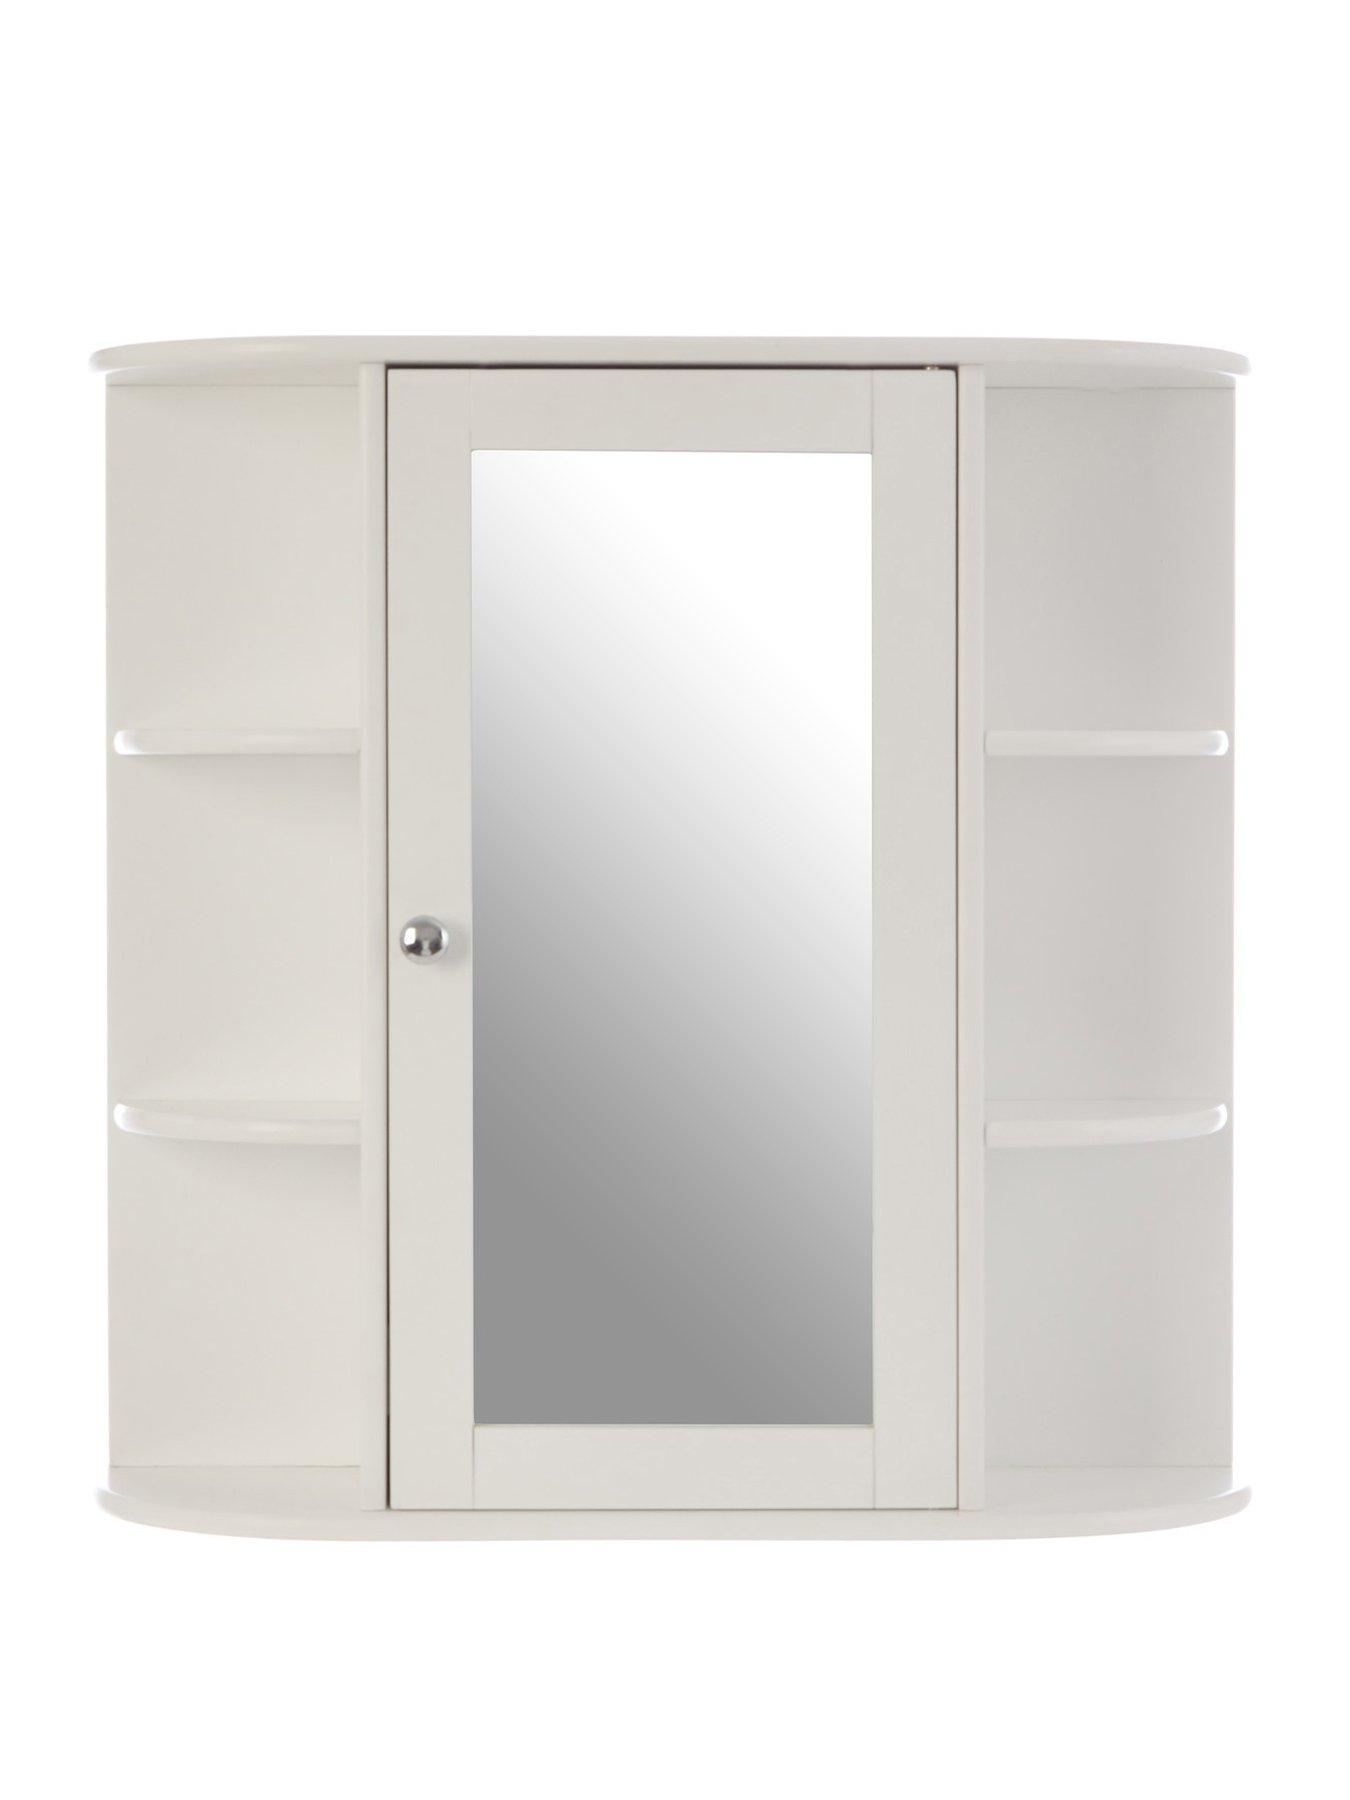 White Premier Housewares Bathroom Cabinet with Mirrored Door and 3 Compartments 58 x 46 x 20 cm